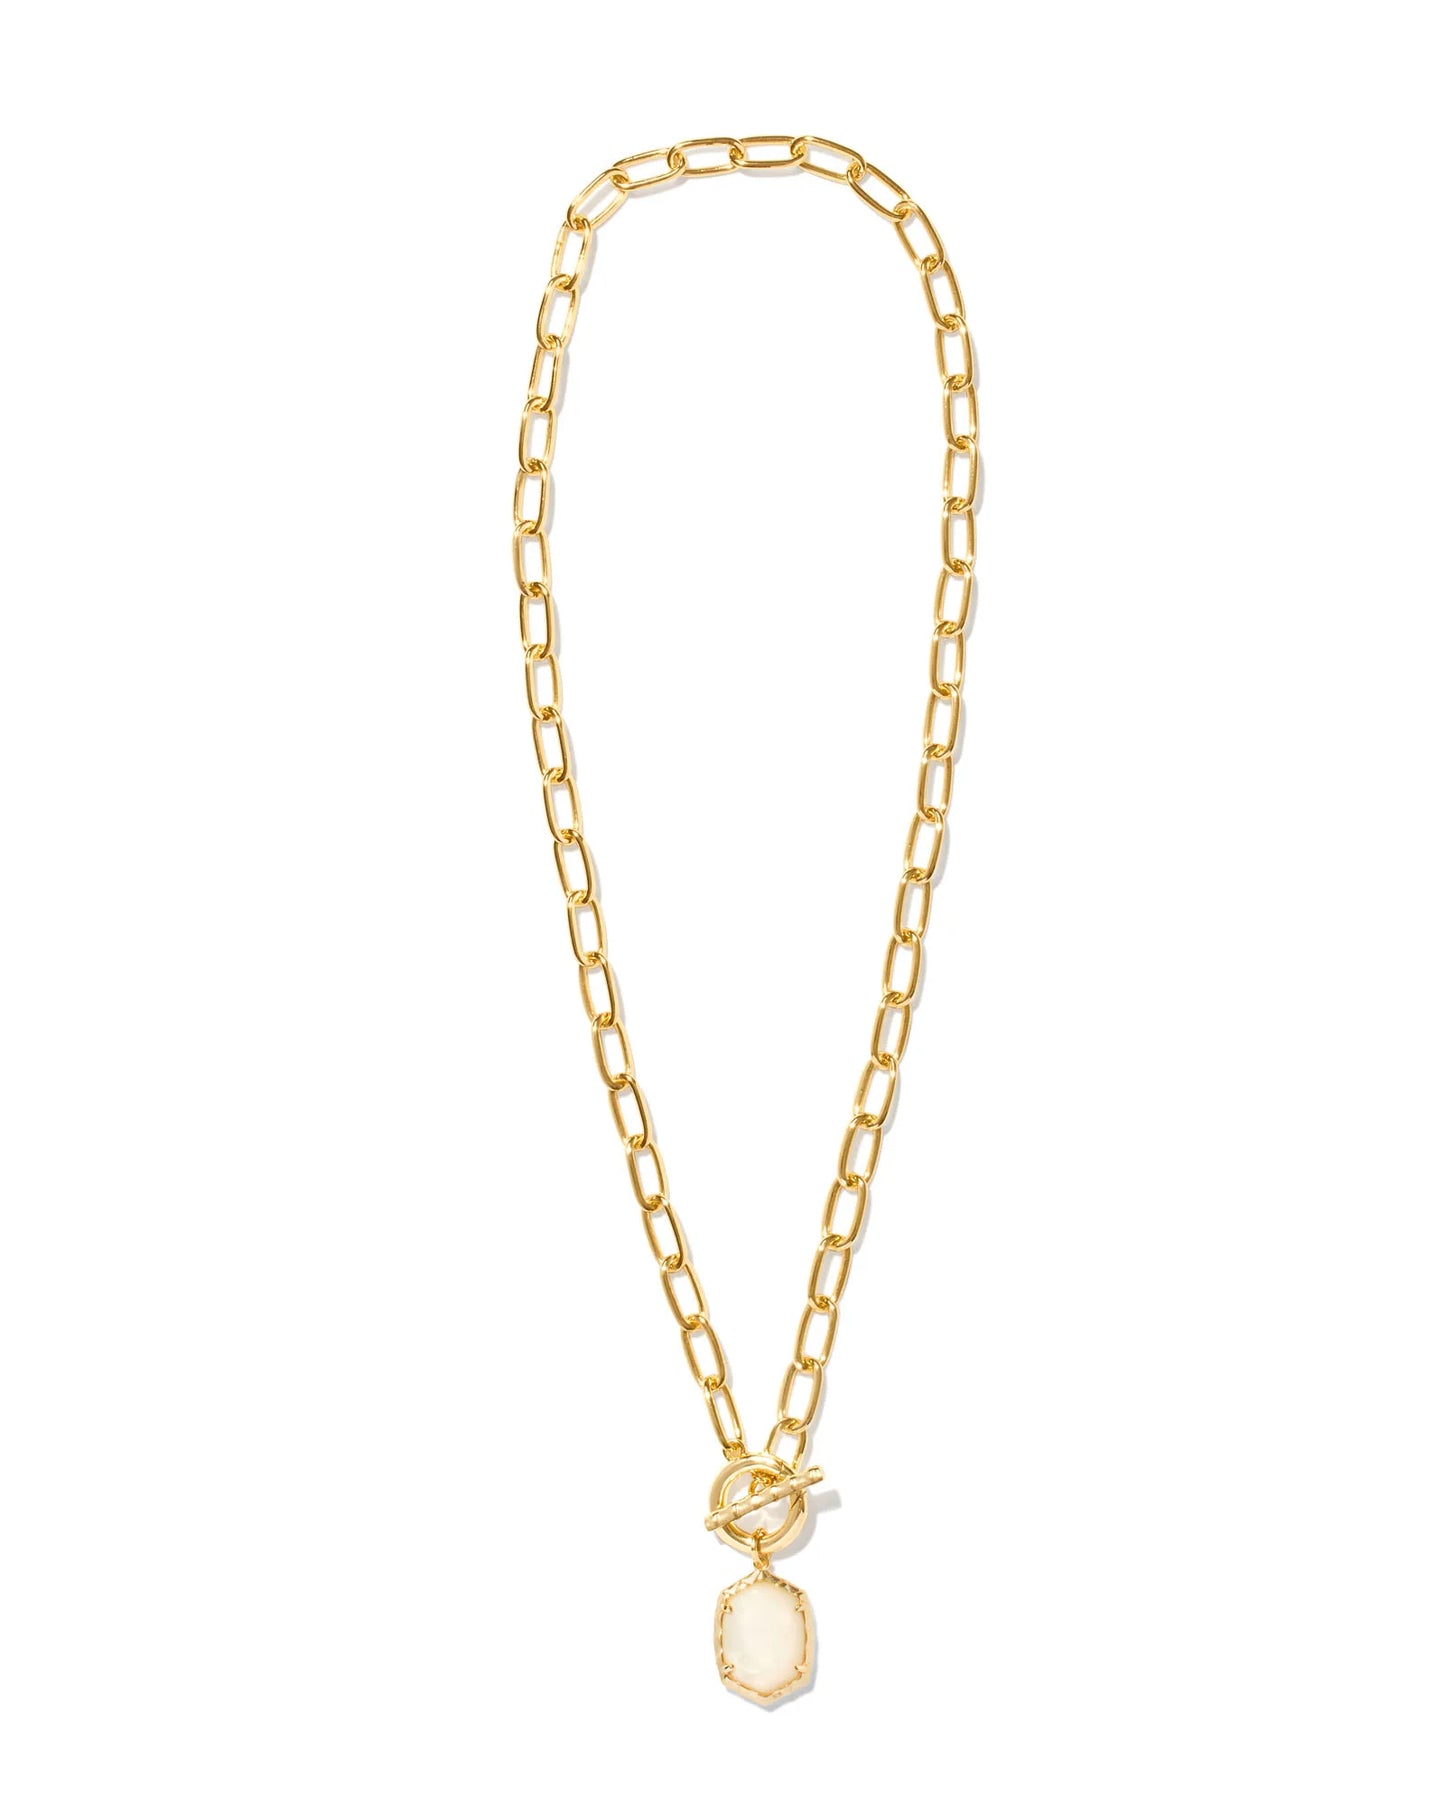 Kendra Scott- Daphne Convertible Gold Link and Chain Necklace in Ivory